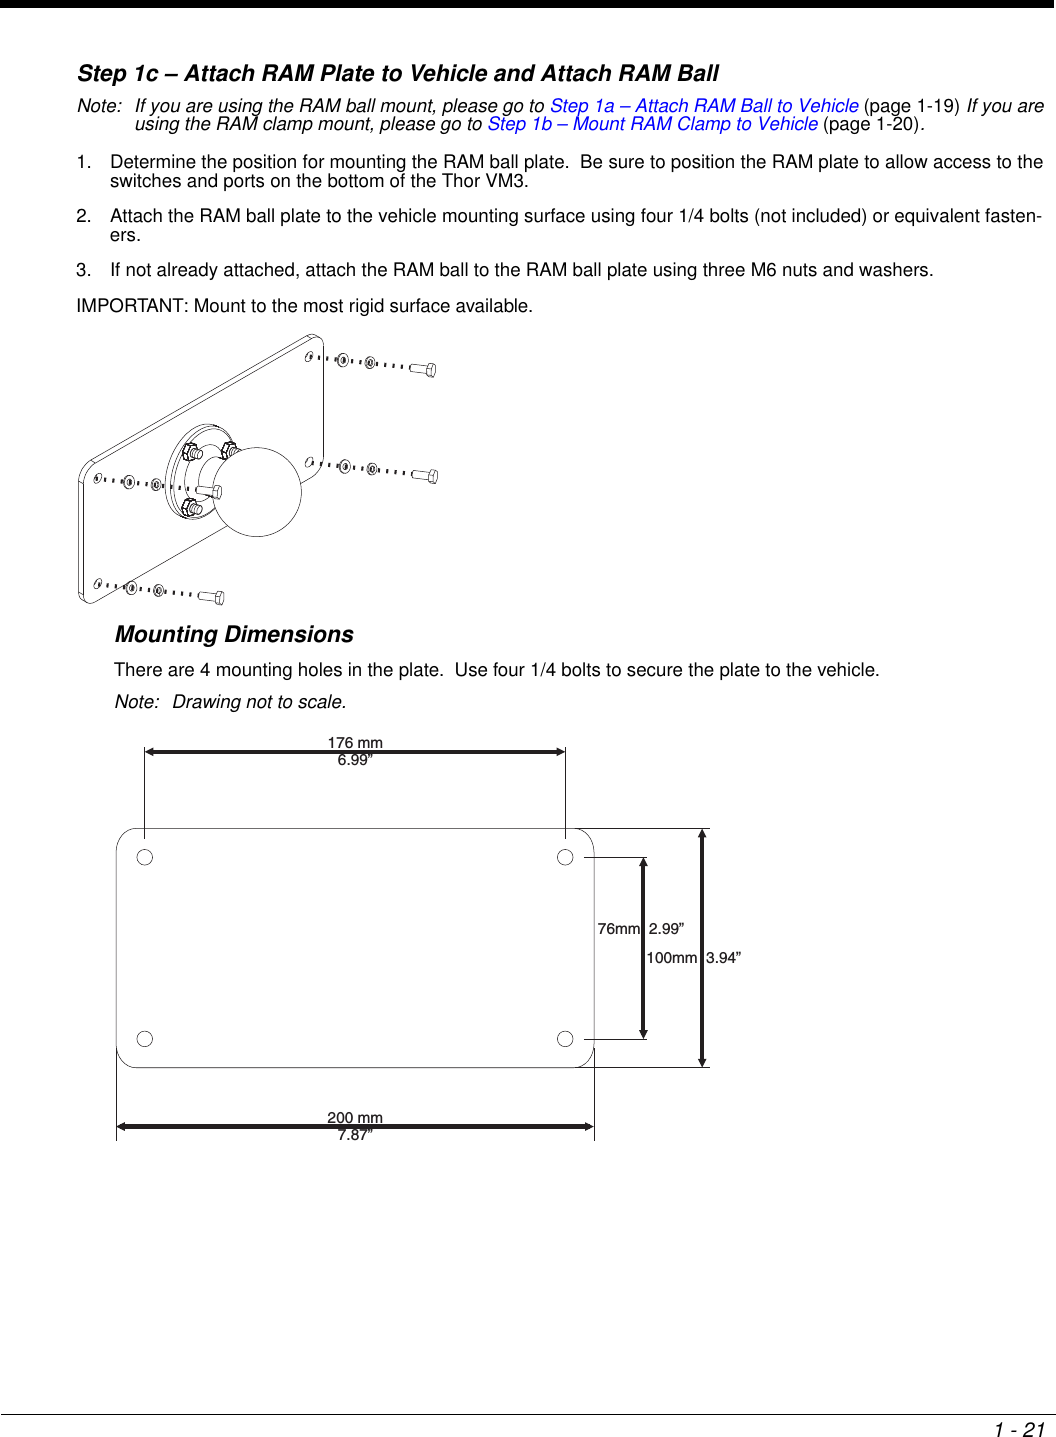 1 - 21Step 1c – Attach RAM Plate to Vehicle and Attach RAM BallNote: If you are using the RAM ball mount, please go to Step 1a – Attach RAM Ball to Vehicle (page 1-19) If you are using the RAM clamp mount, please go to Step 1b – Mount RAM Clamp to Vehicle (page 1-20).1. Determine the position for mounting the RAM ball plate.  Be sure to position the RAM plate to allow access to the switches and ports on the bottom of the Thor VM3.2. Attach the RAM ball plate to the vehicle mounting surface using four 1/4 bolts (not included) or equivalent fasten-ers.3. If not already attached, attach the RAM ball to the RAM ball plate using three M6 nuts and washers.IMPORTANT: Mount to the most rigid surface available.Mounting DimensionsThere are 4 mounting holes in the plate.  Use four 1/4 bolts to secure the plate to the vehicle.Note: Drawing not to scale.176 mm6.99”200 mm7.87”76mm 2.99”100mm 3.94”